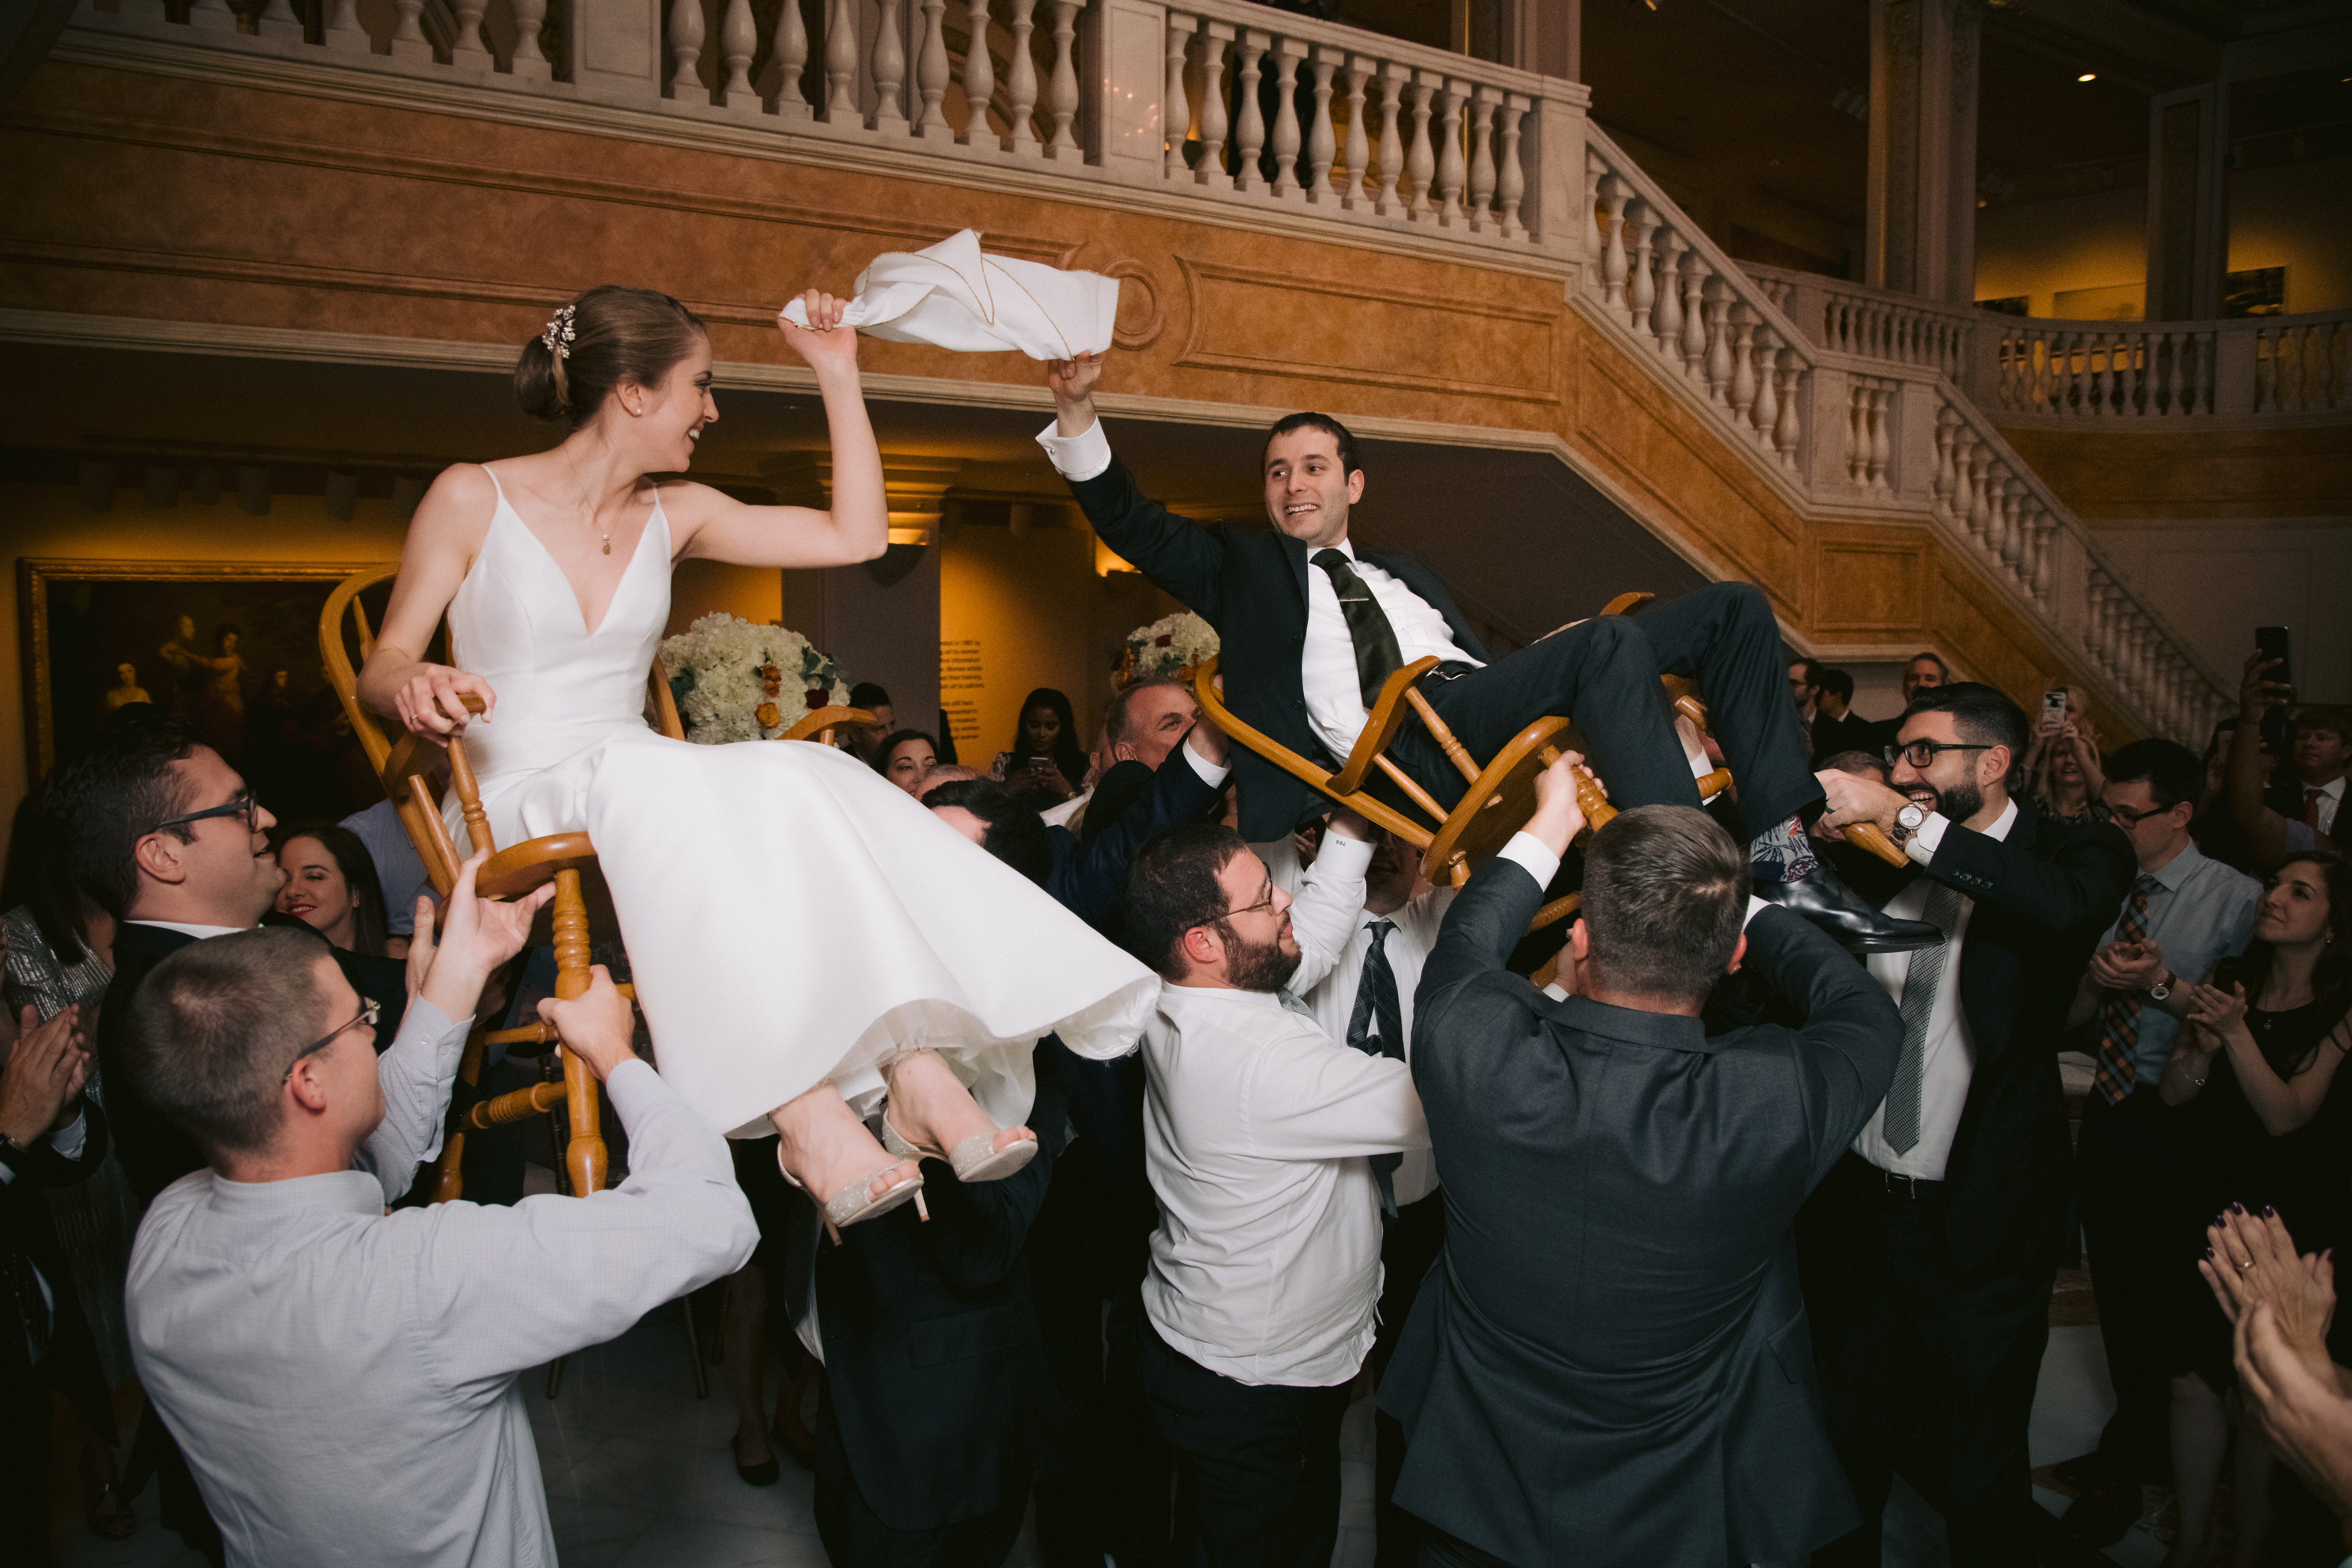 A Jewish wedding couple are lifted up in the air. Wedding planning timeline.